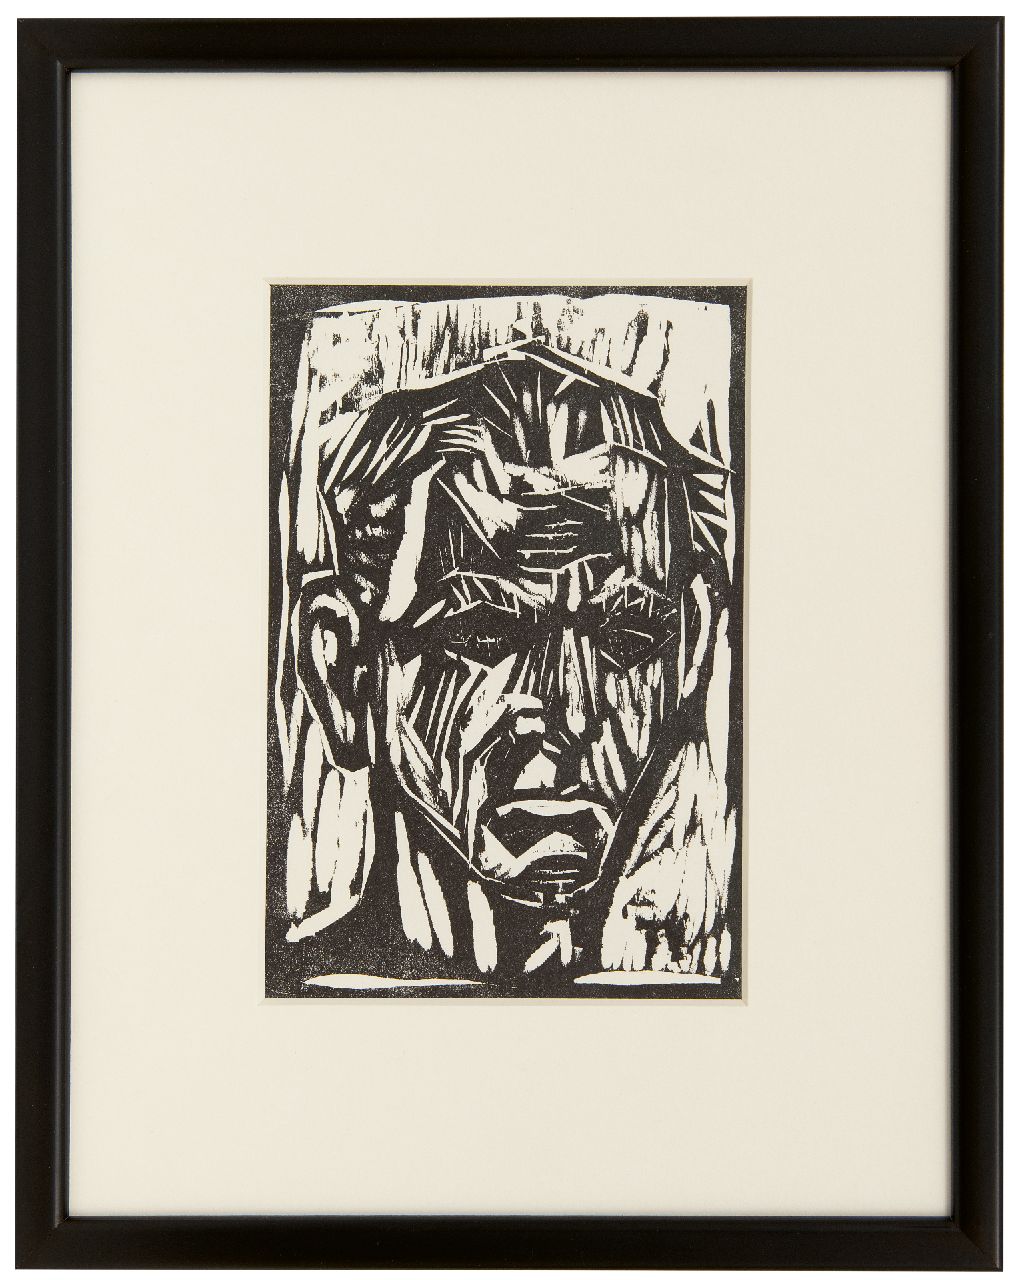 Dix W.H.O.  | Wilhelm Heinrich 'Otto' Dix | Prints and Multiples offered for sale | Self portrait, woodcut 20.8 x 14.3 cm, executed in 1960